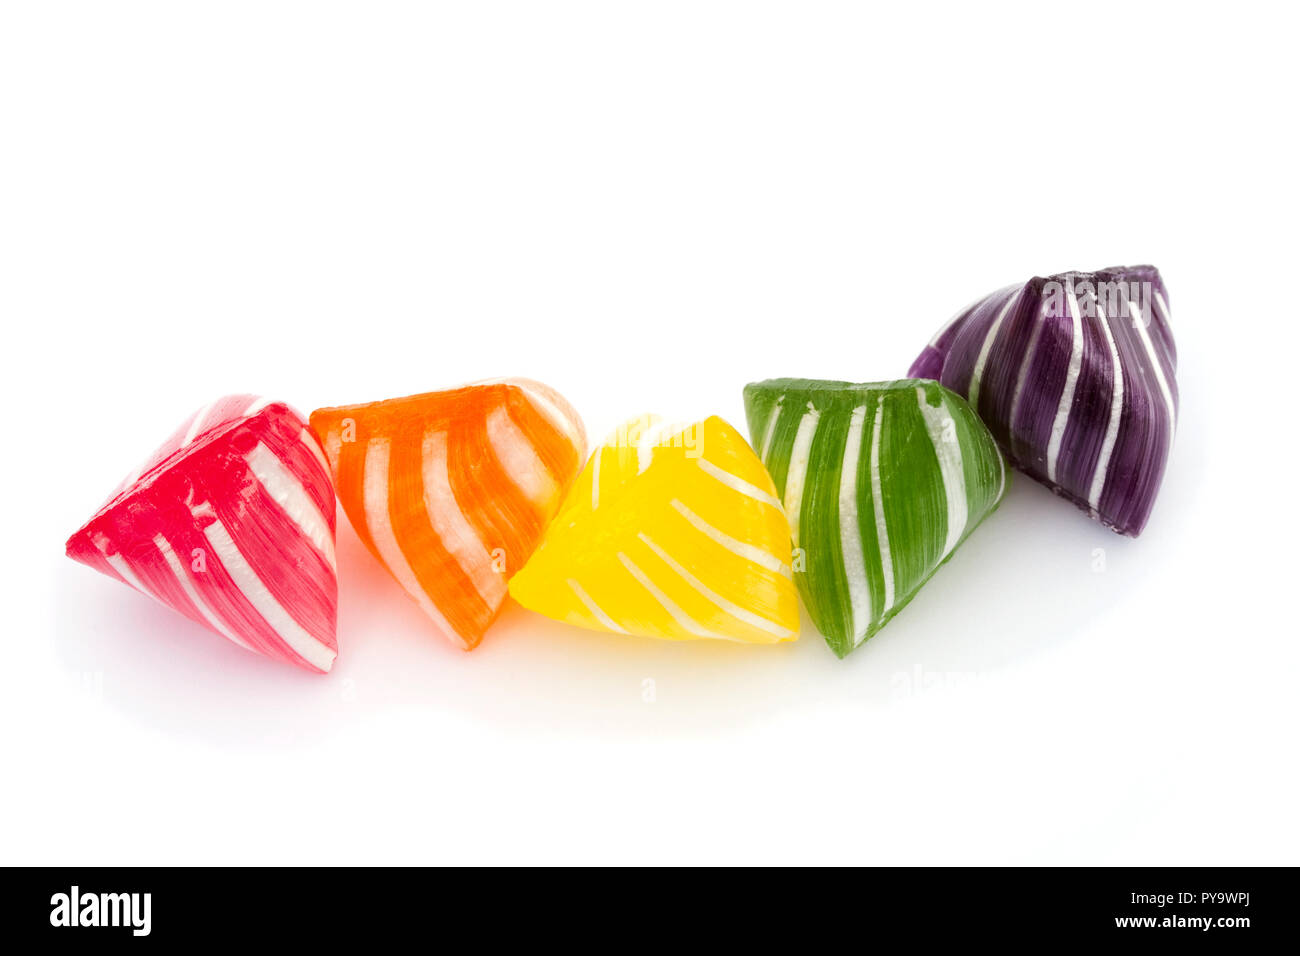 Five rainbow colored sweets in a row: red, orange, yellow, green and purple Stock Photo